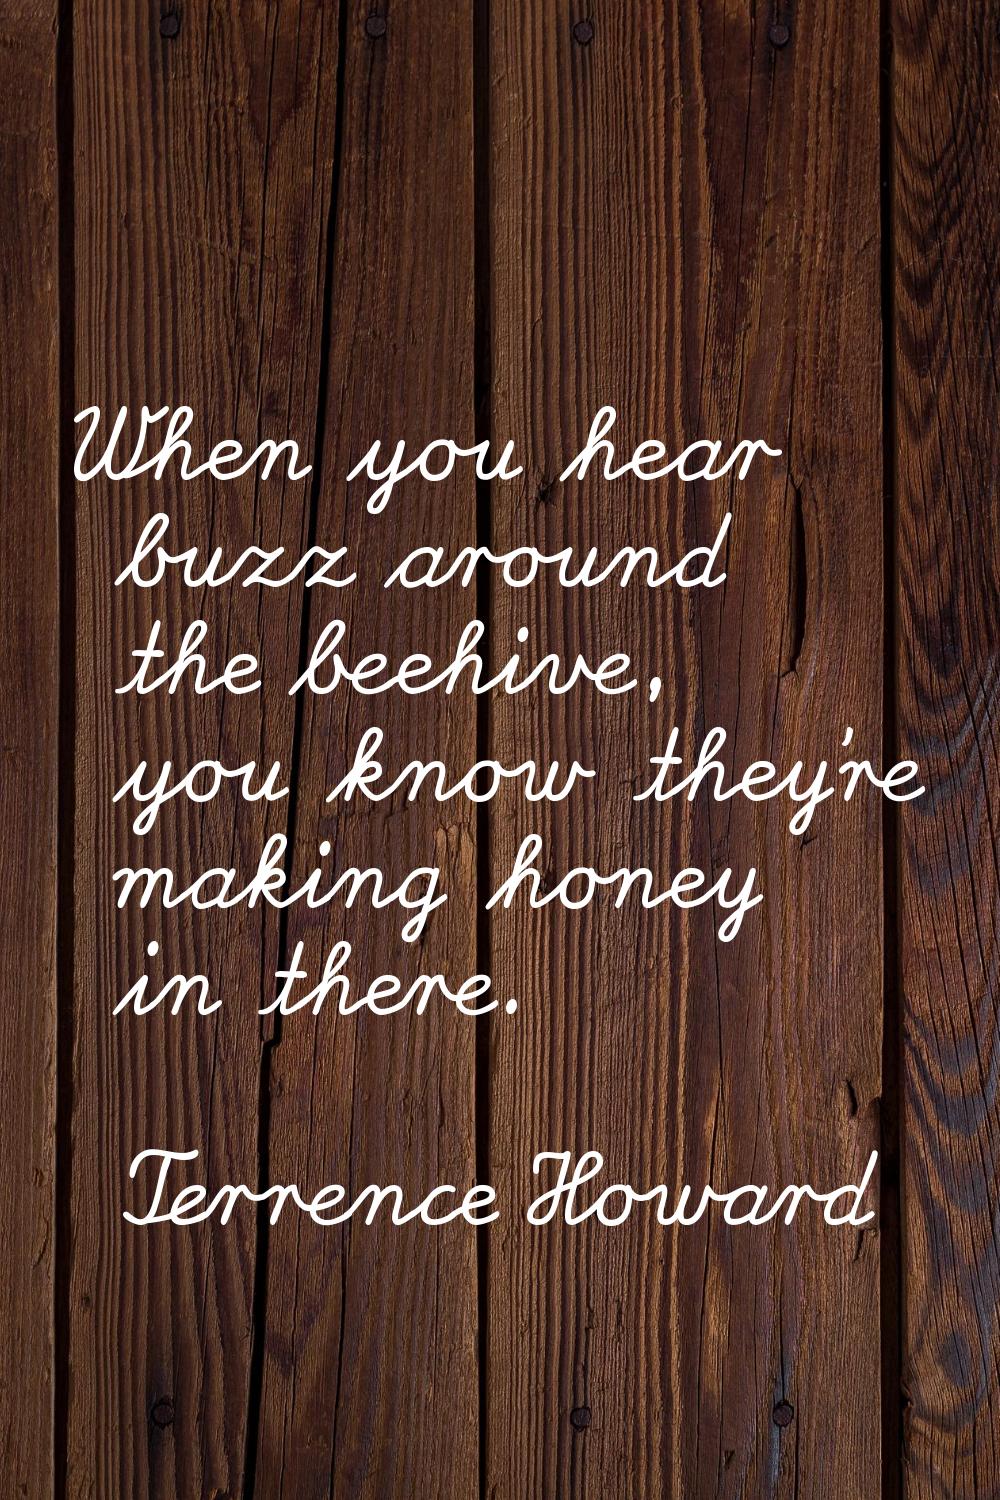 When you hear buzz around the beehive, you know they're making honey in there.